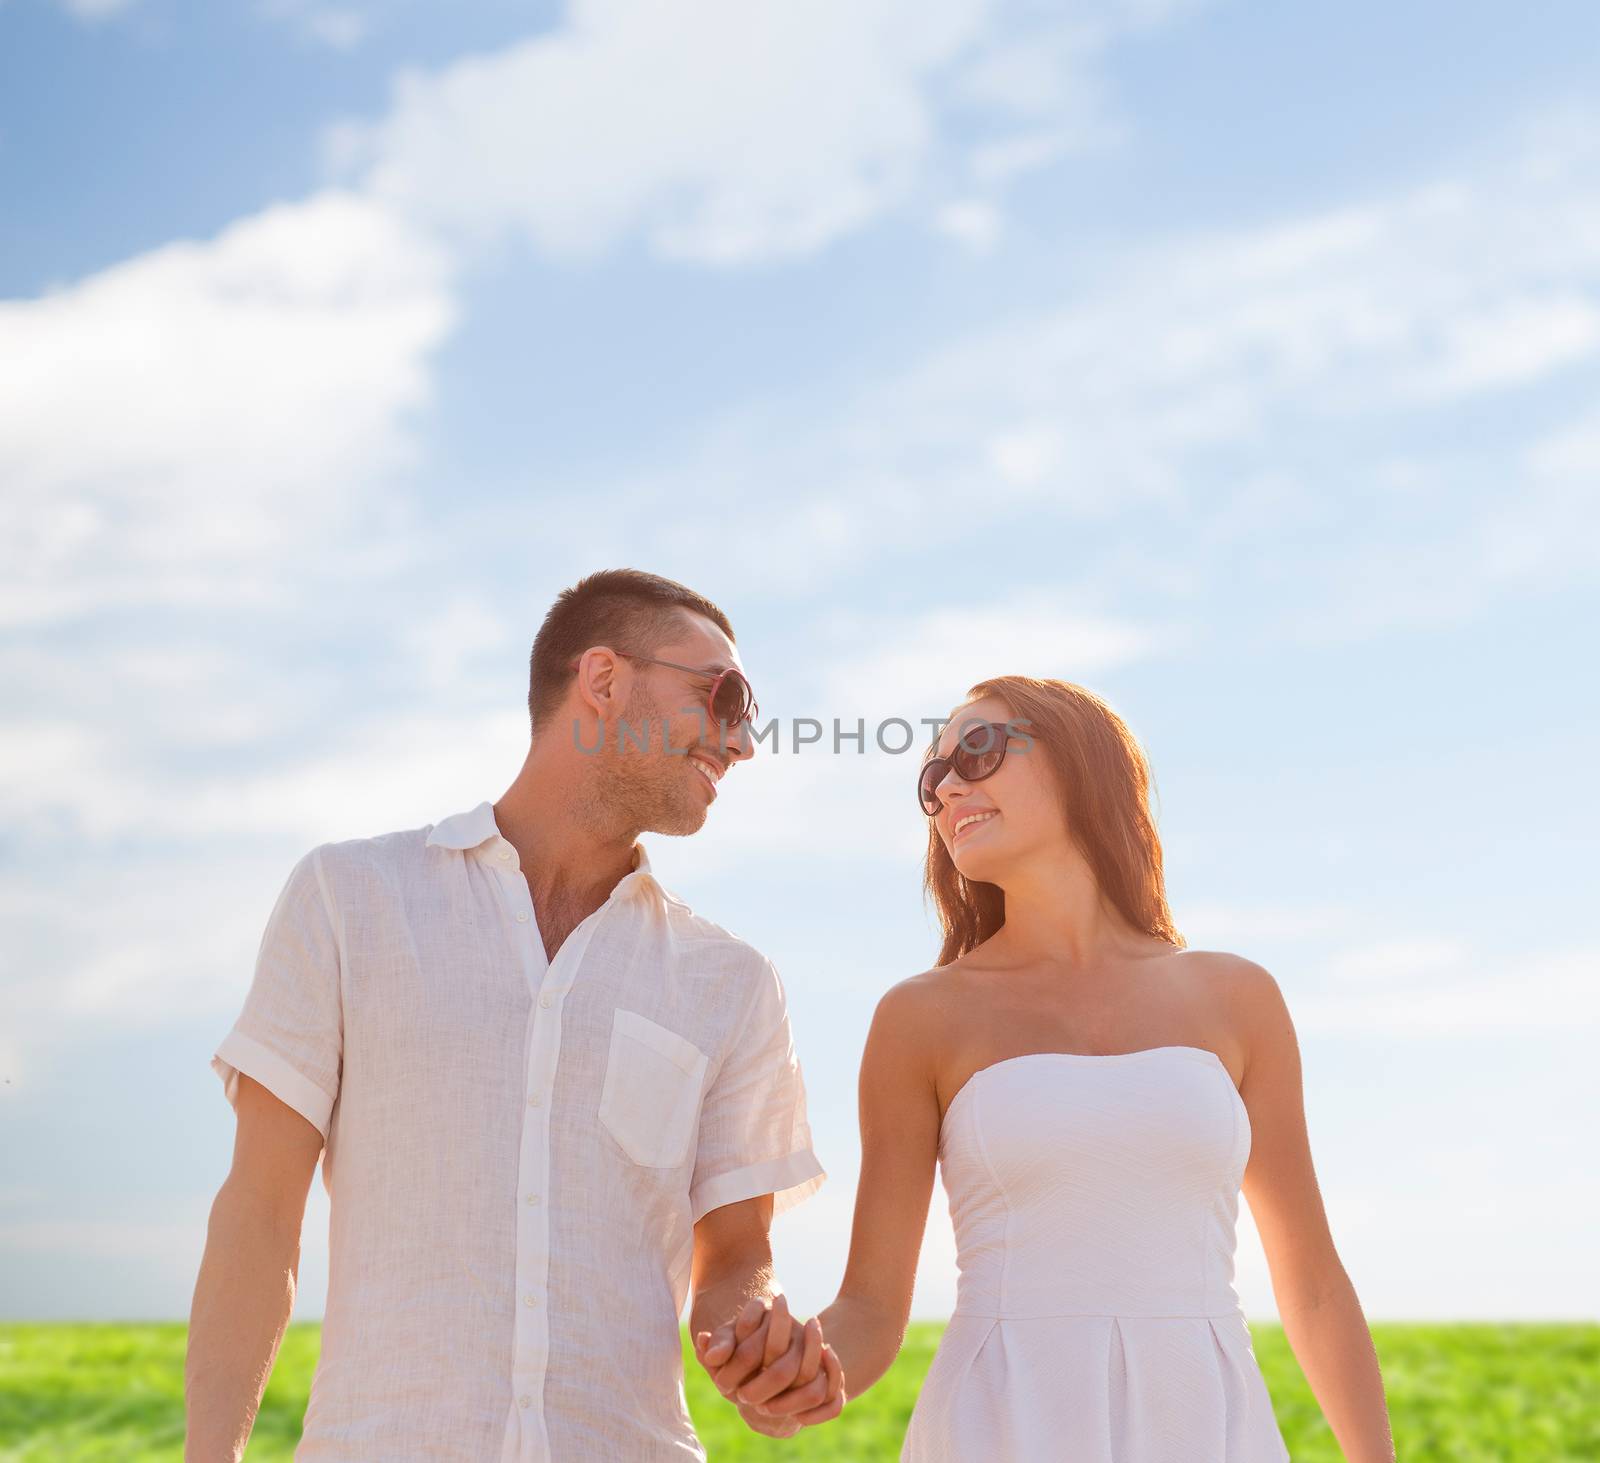 love, people, summer and relations concept - smiling couple wearing sunglasses walking outdoors over blue sky and grass background